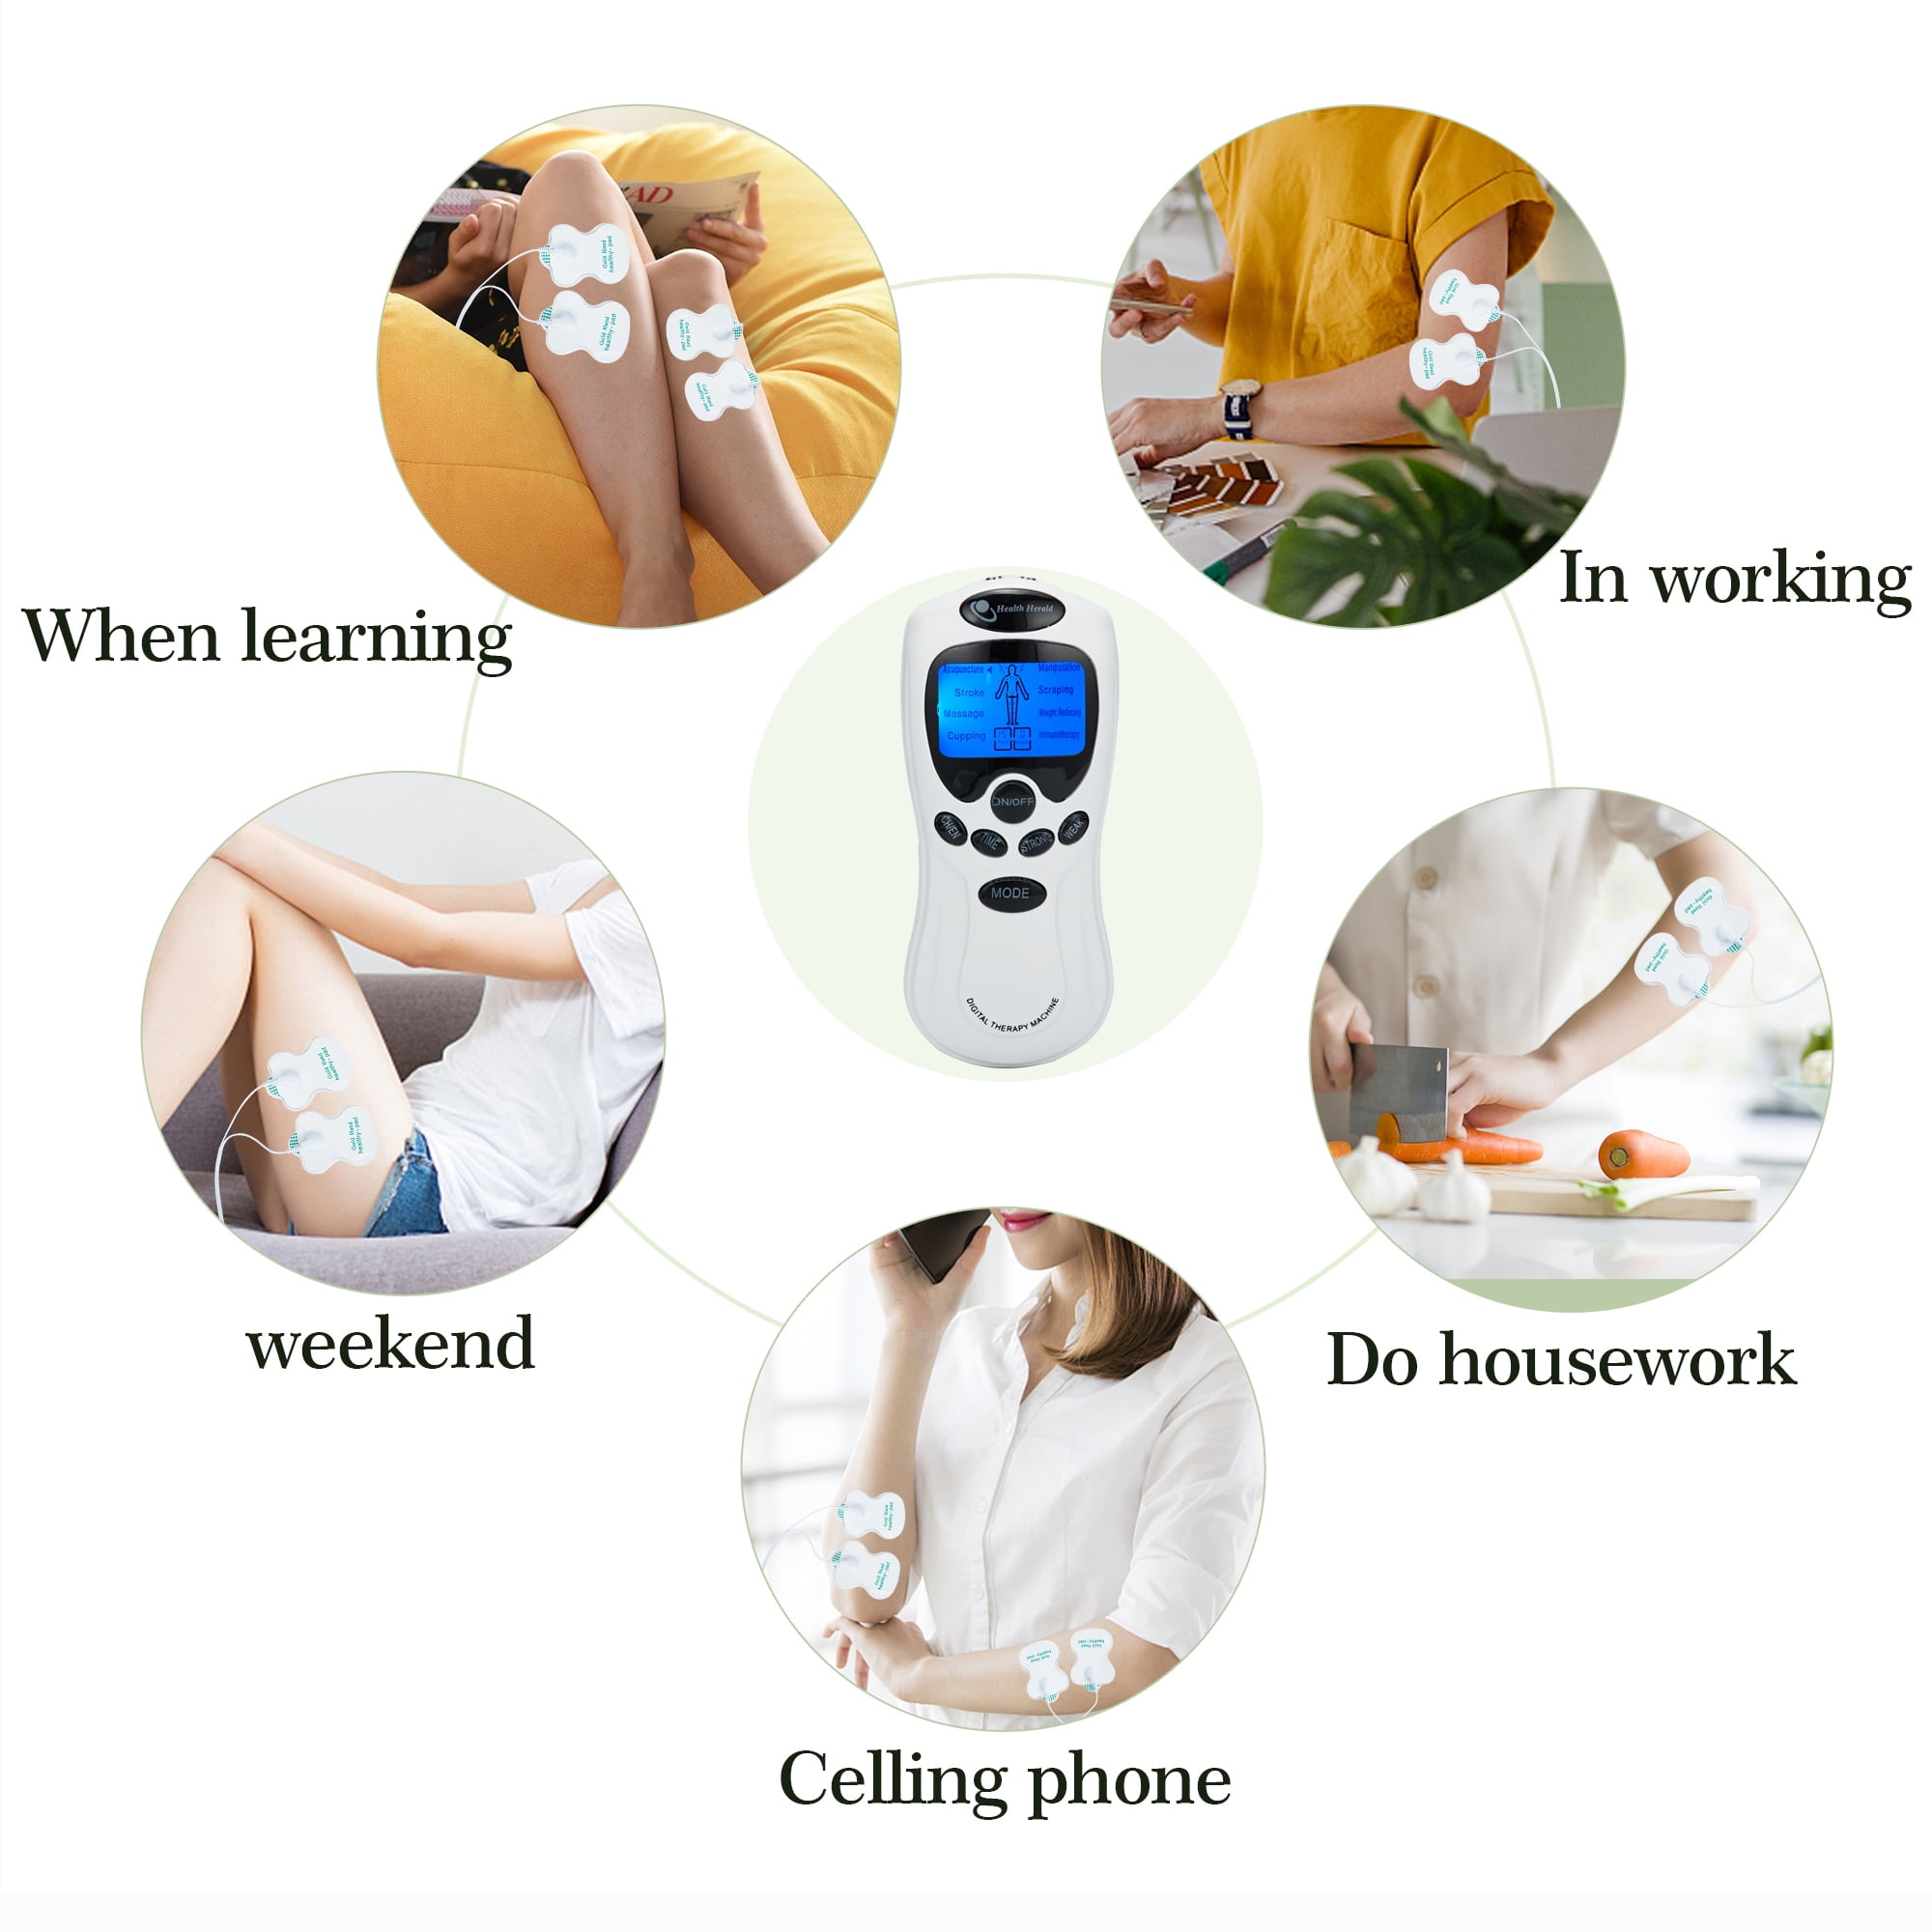 Onemayship Tens Unit Electrical Massager Pulse Muscle Stimulator Back Pain  Relief Electrical Stimulation Muscle Relax Therapy 